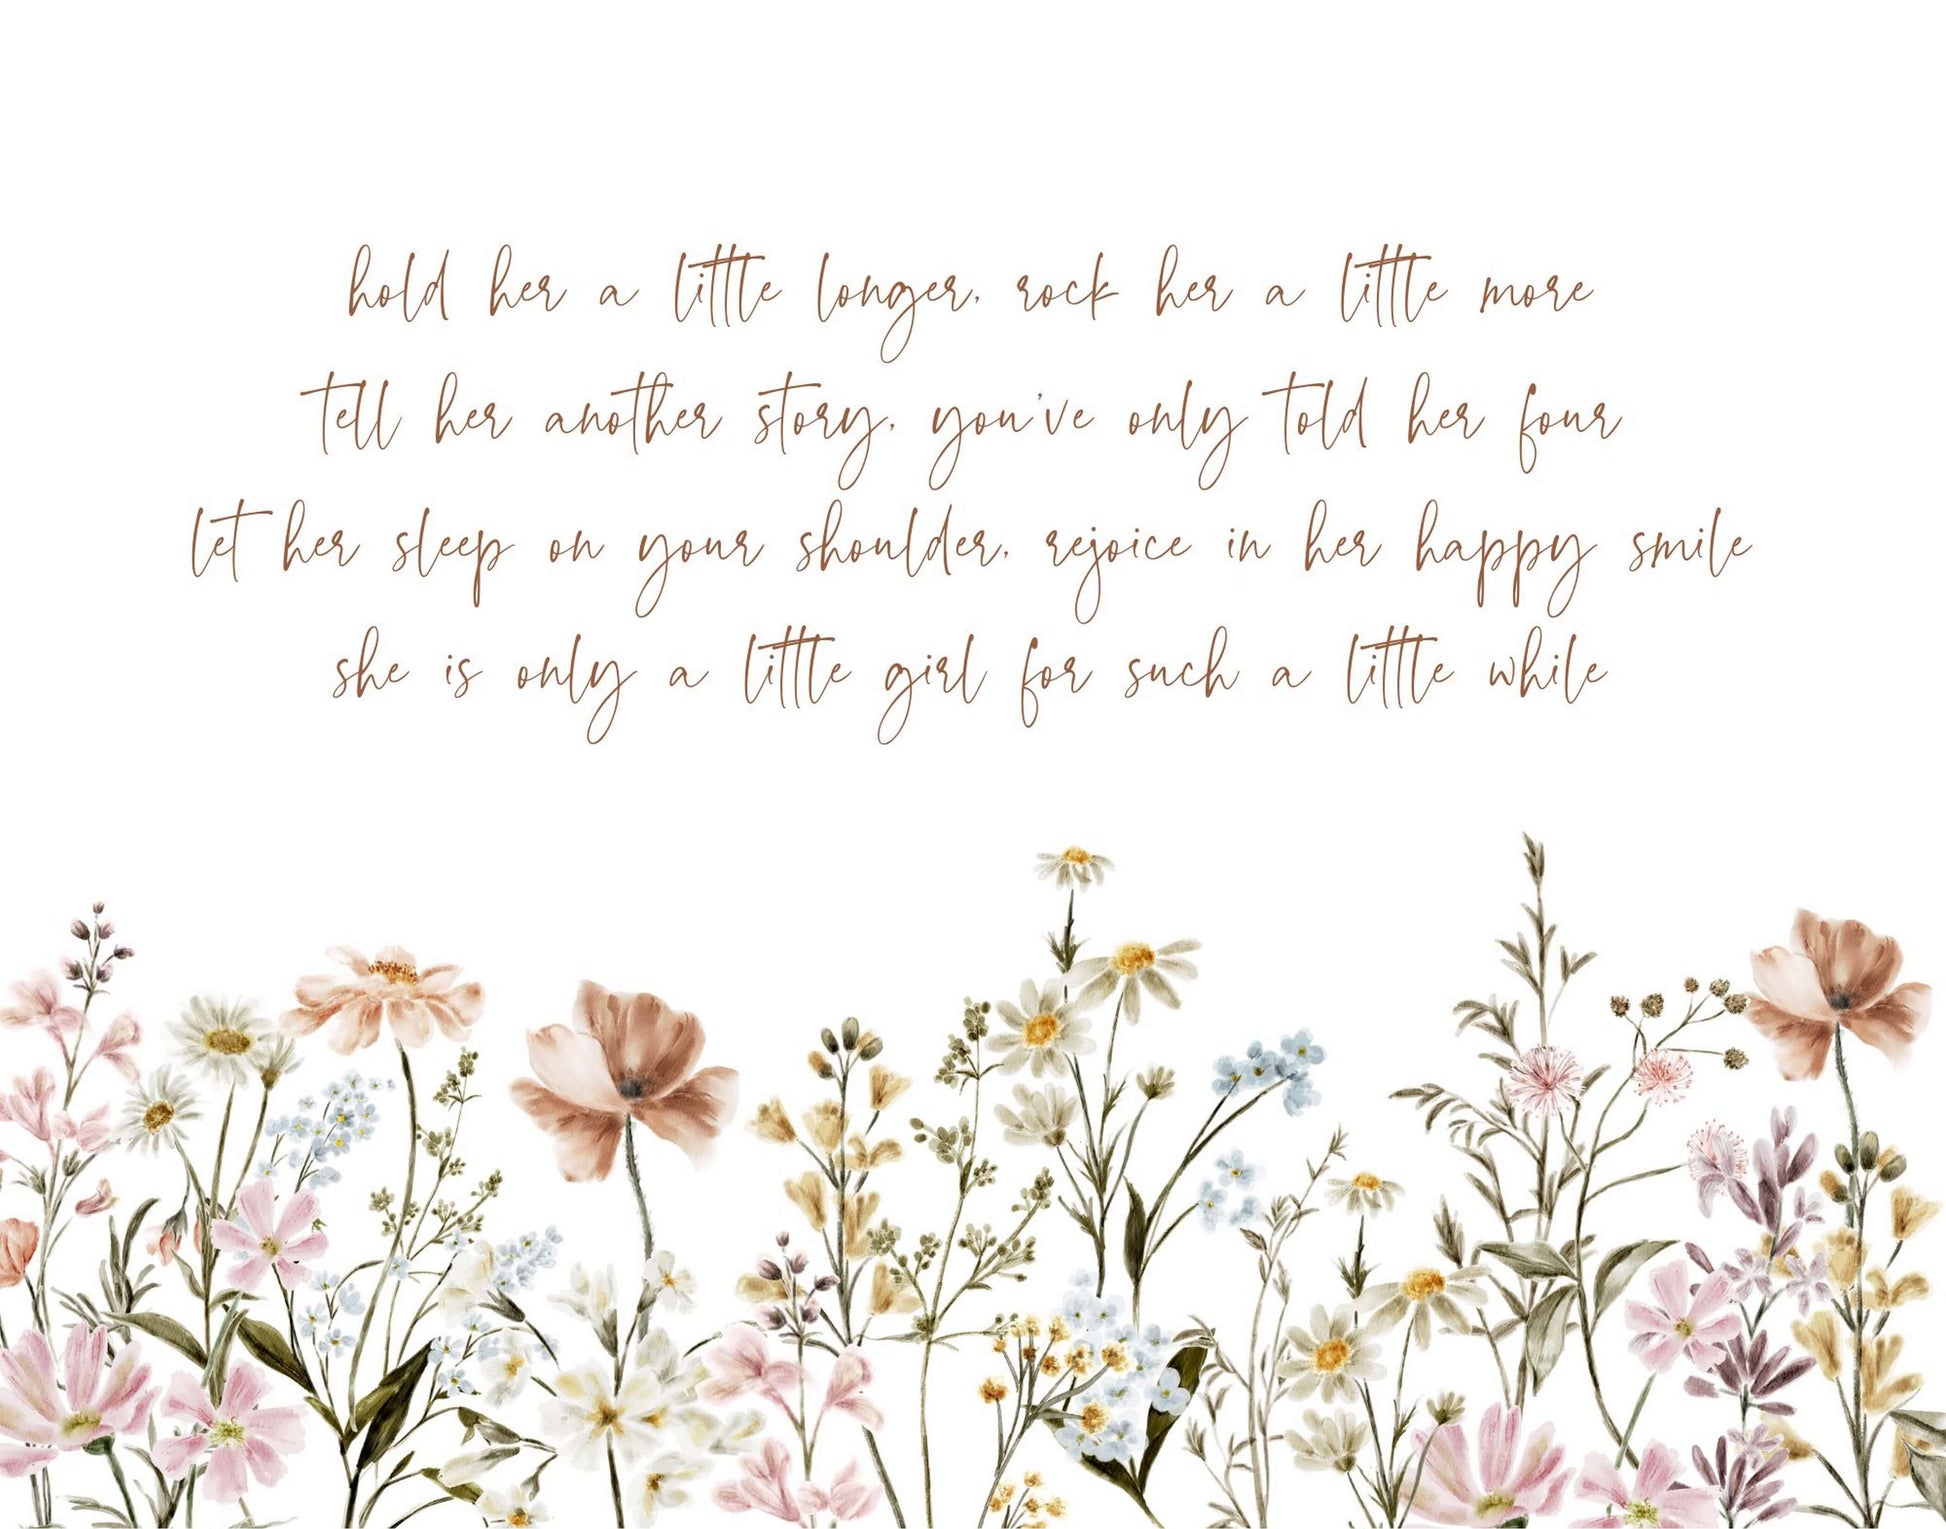 girl nursery wall art with wildflowers and nursery quote hold her a little longer